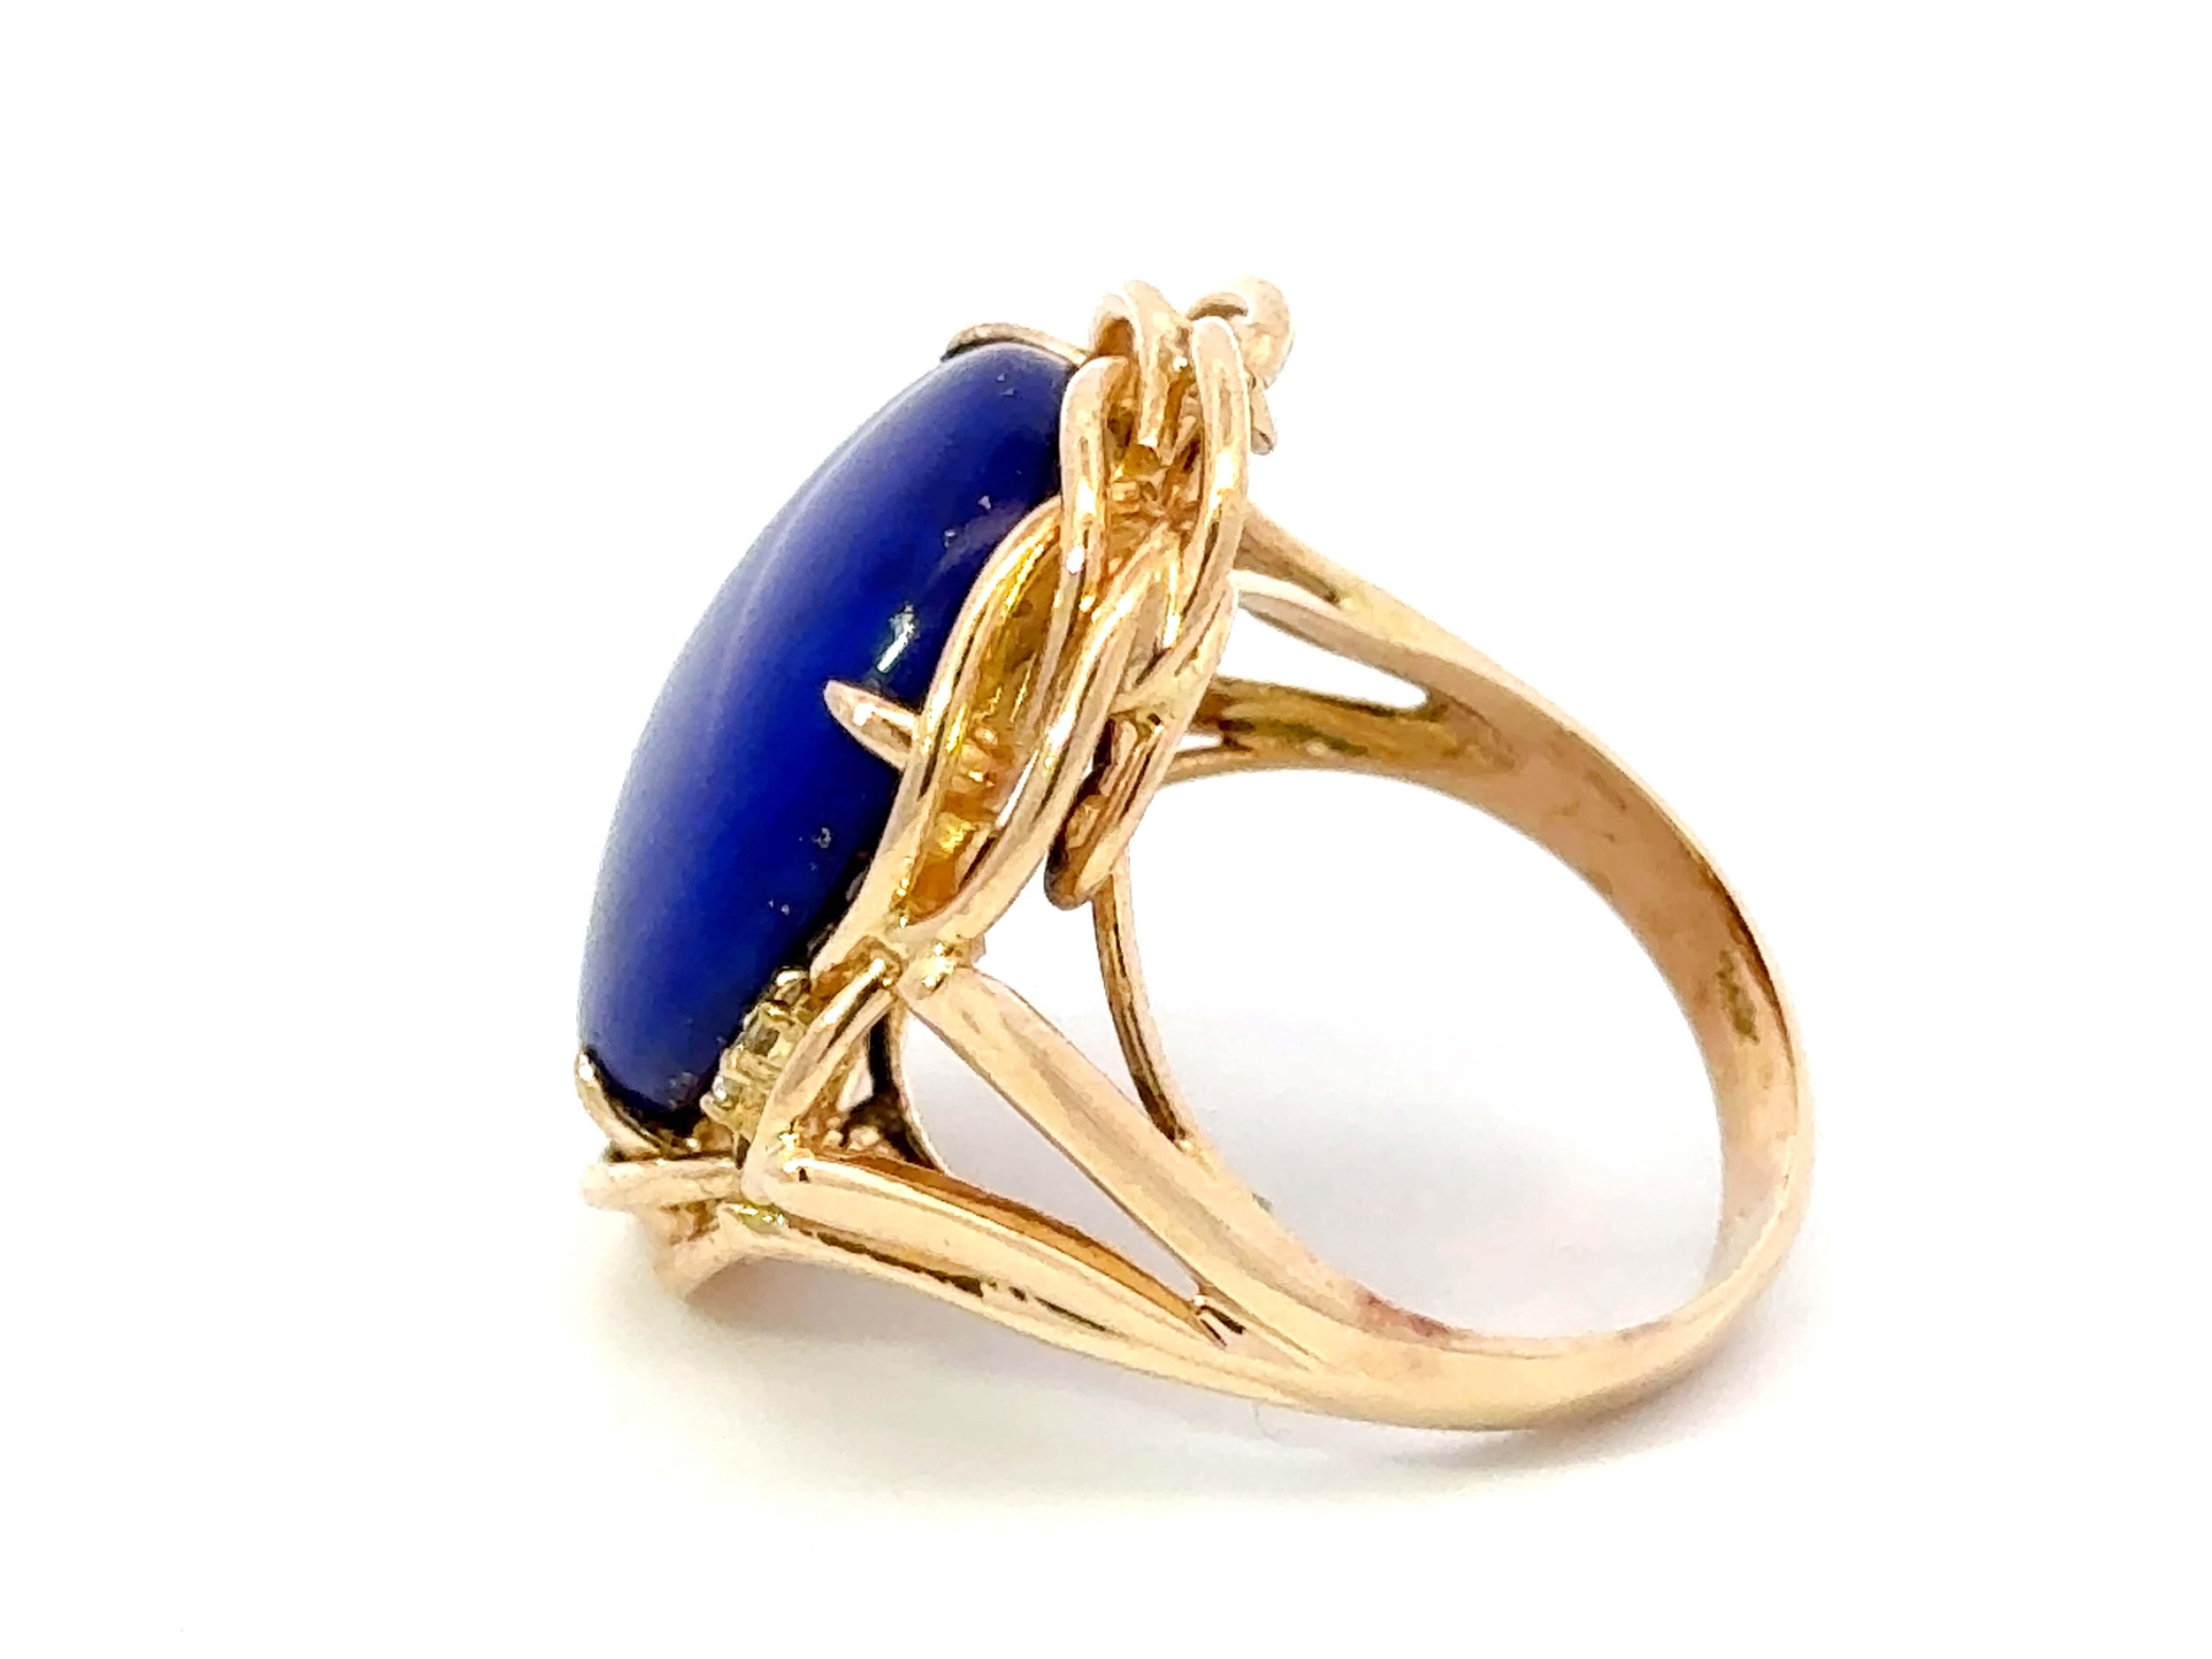 Women's Large Oval Lapis Lazuli Diamond Cocktail Ring 14k Yellow Gold For Sale